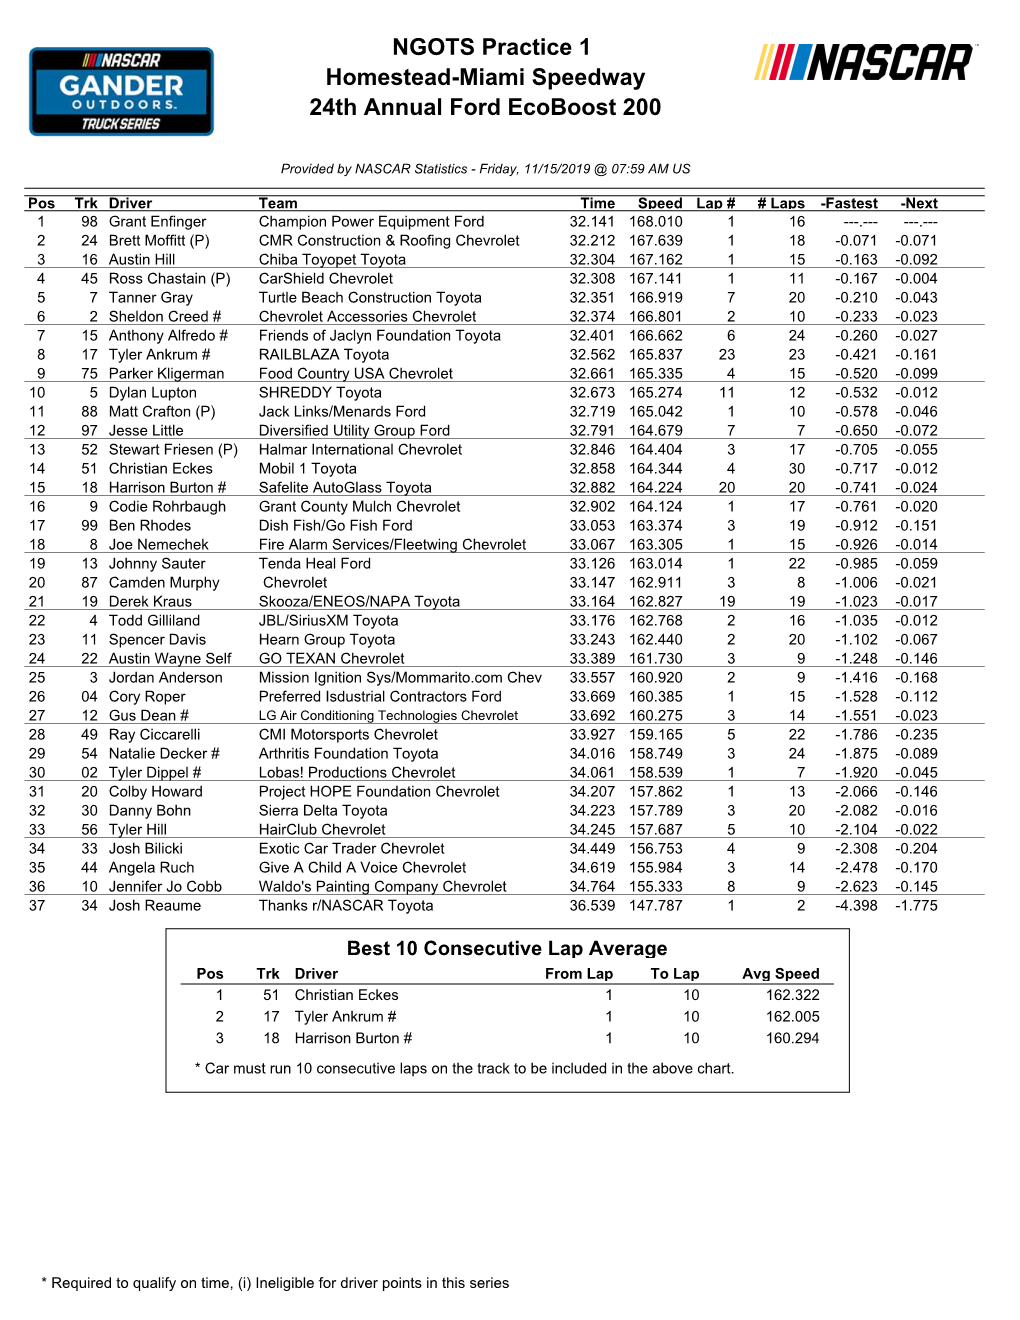 NGOTS Practice 1 Homestead-Miami Speedway 24Th Annual Ford Ecoboost 200